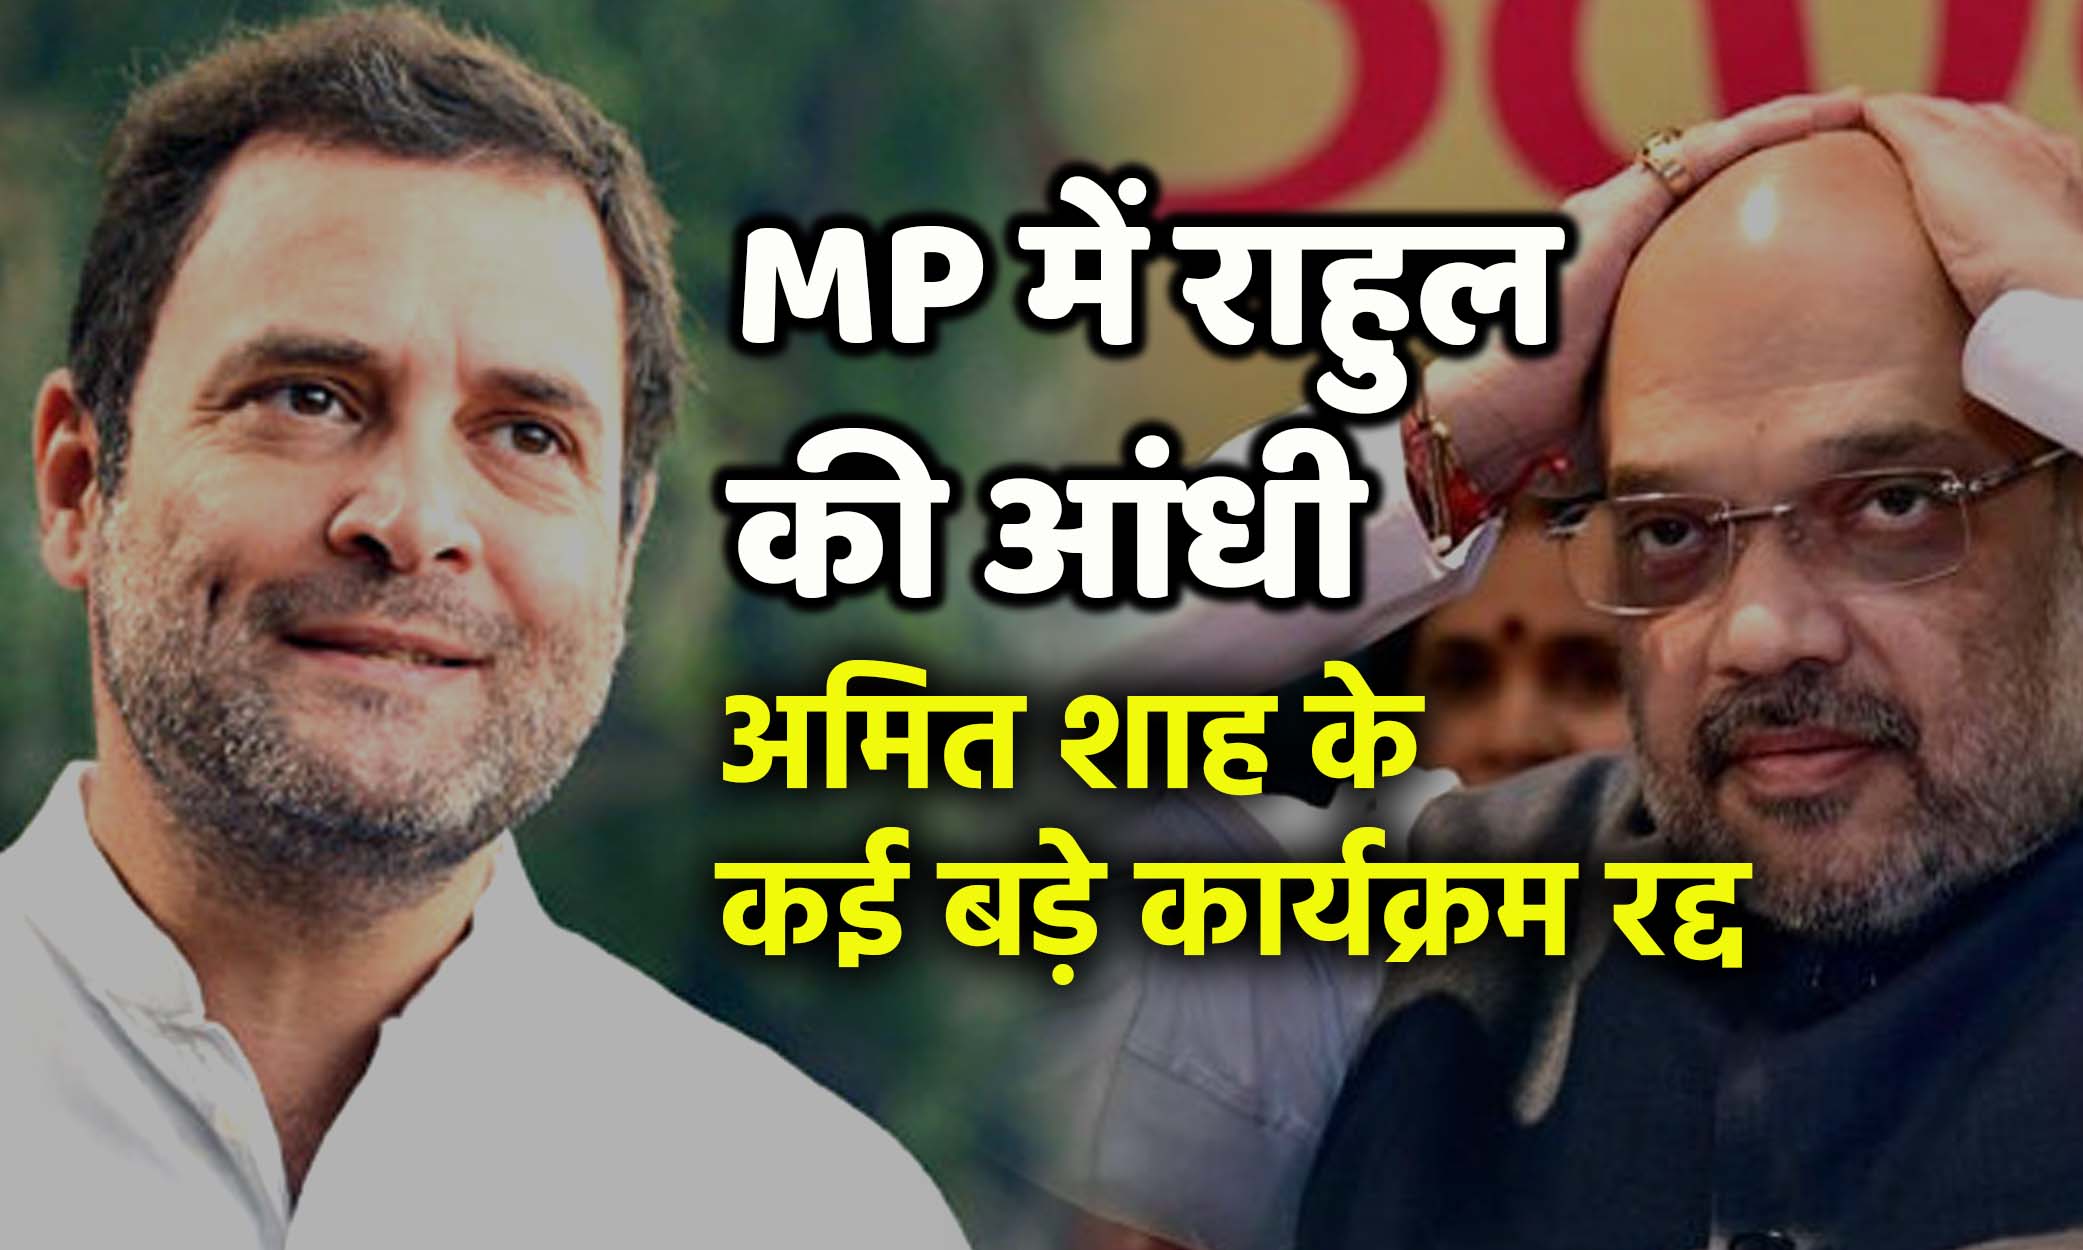 rahuls-storm-in-madhya-pradesh-dozens-of-amit-shahs-programs-canceled-continuously-due-to-flop-show